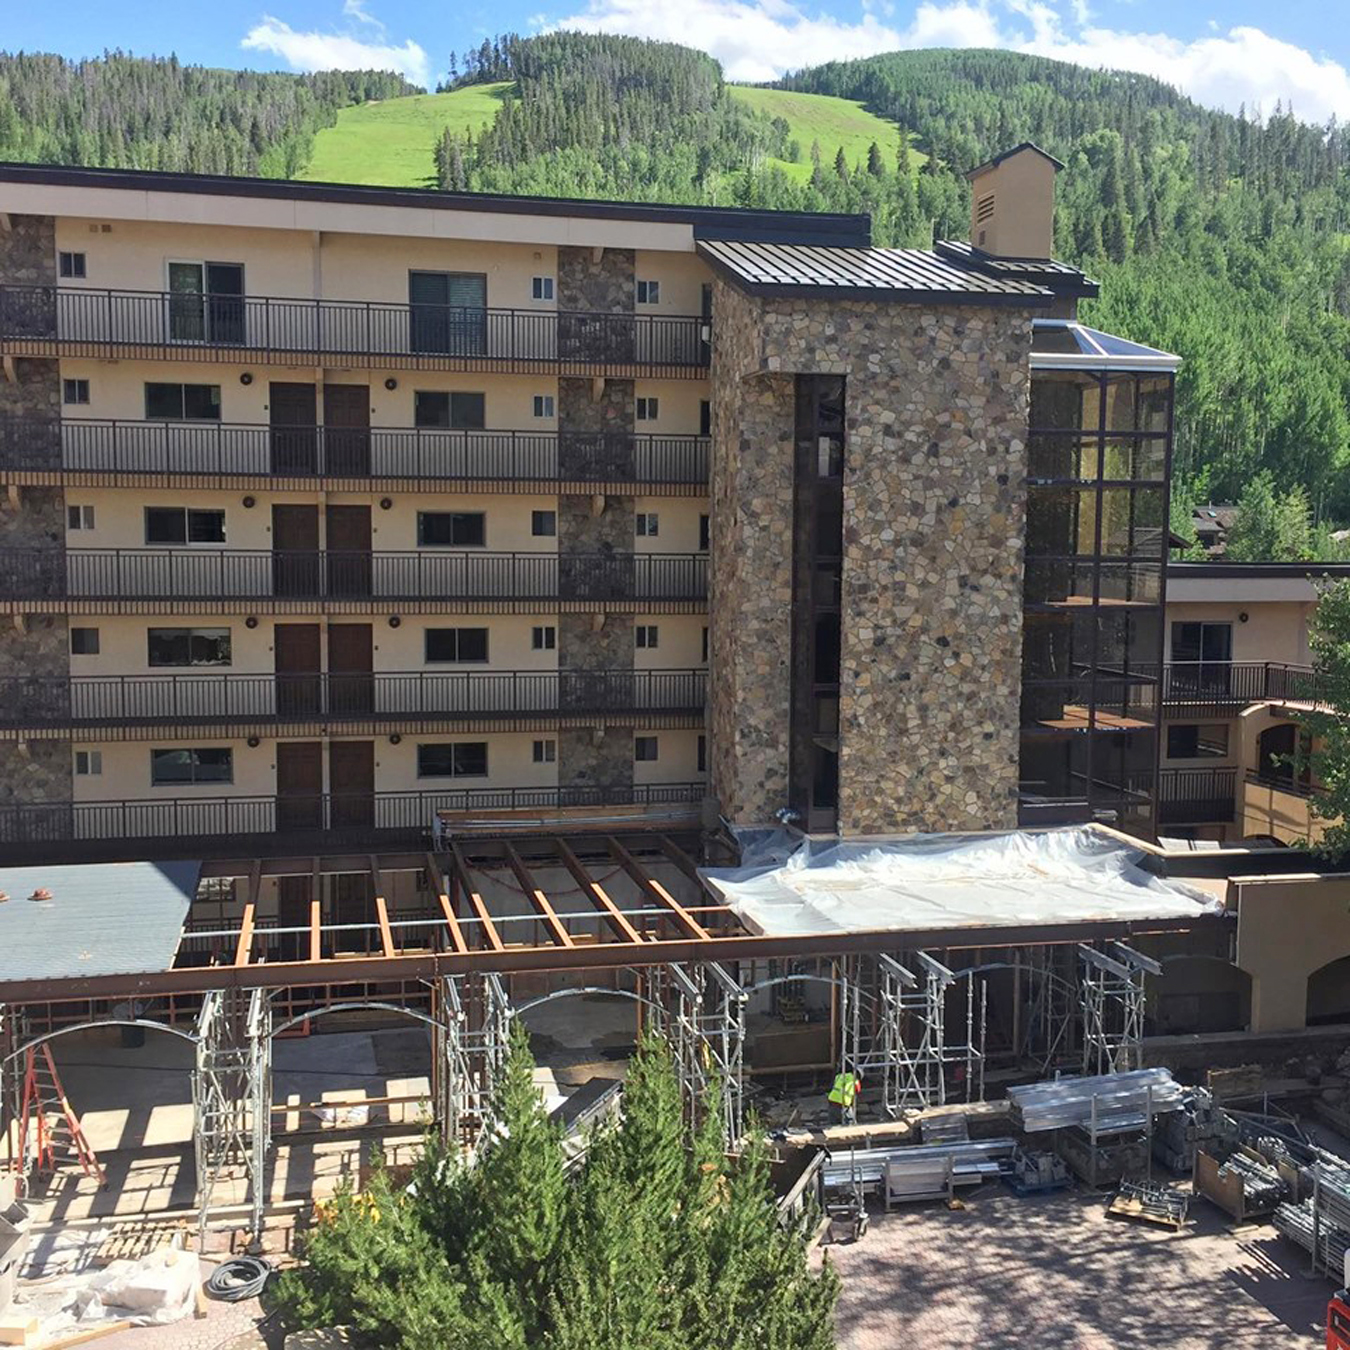 An image taken in July and posted on the Antlers at Vail Facebook page shows construction underway at the Vail, Colorado, mountainside hotel, planned for 2019/2020 ski season completion.